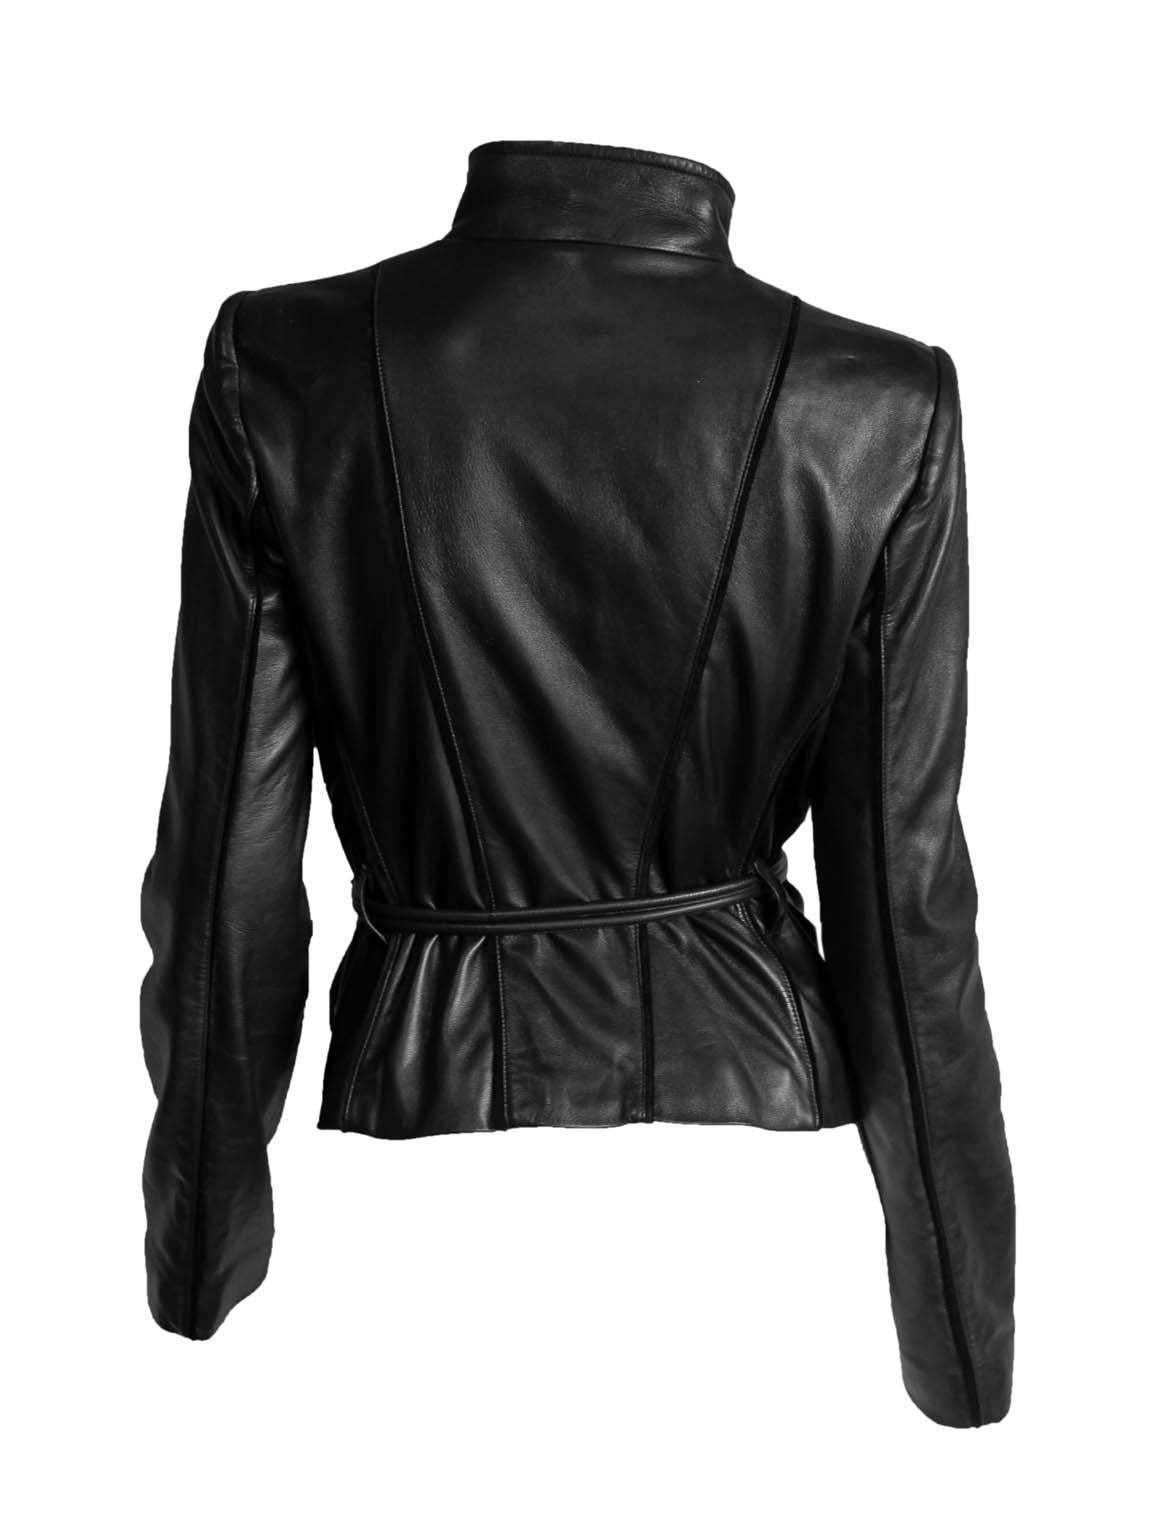 Gorgeous Tom Ford for Gucci Fall/Winter 2004 black belted leather moto jacket. The heavenly moto jacket is an Italian size 42 & will fit a US size 4 to 6 beautifully... an absolute must for any Tom Ford lover or collector!

We've been